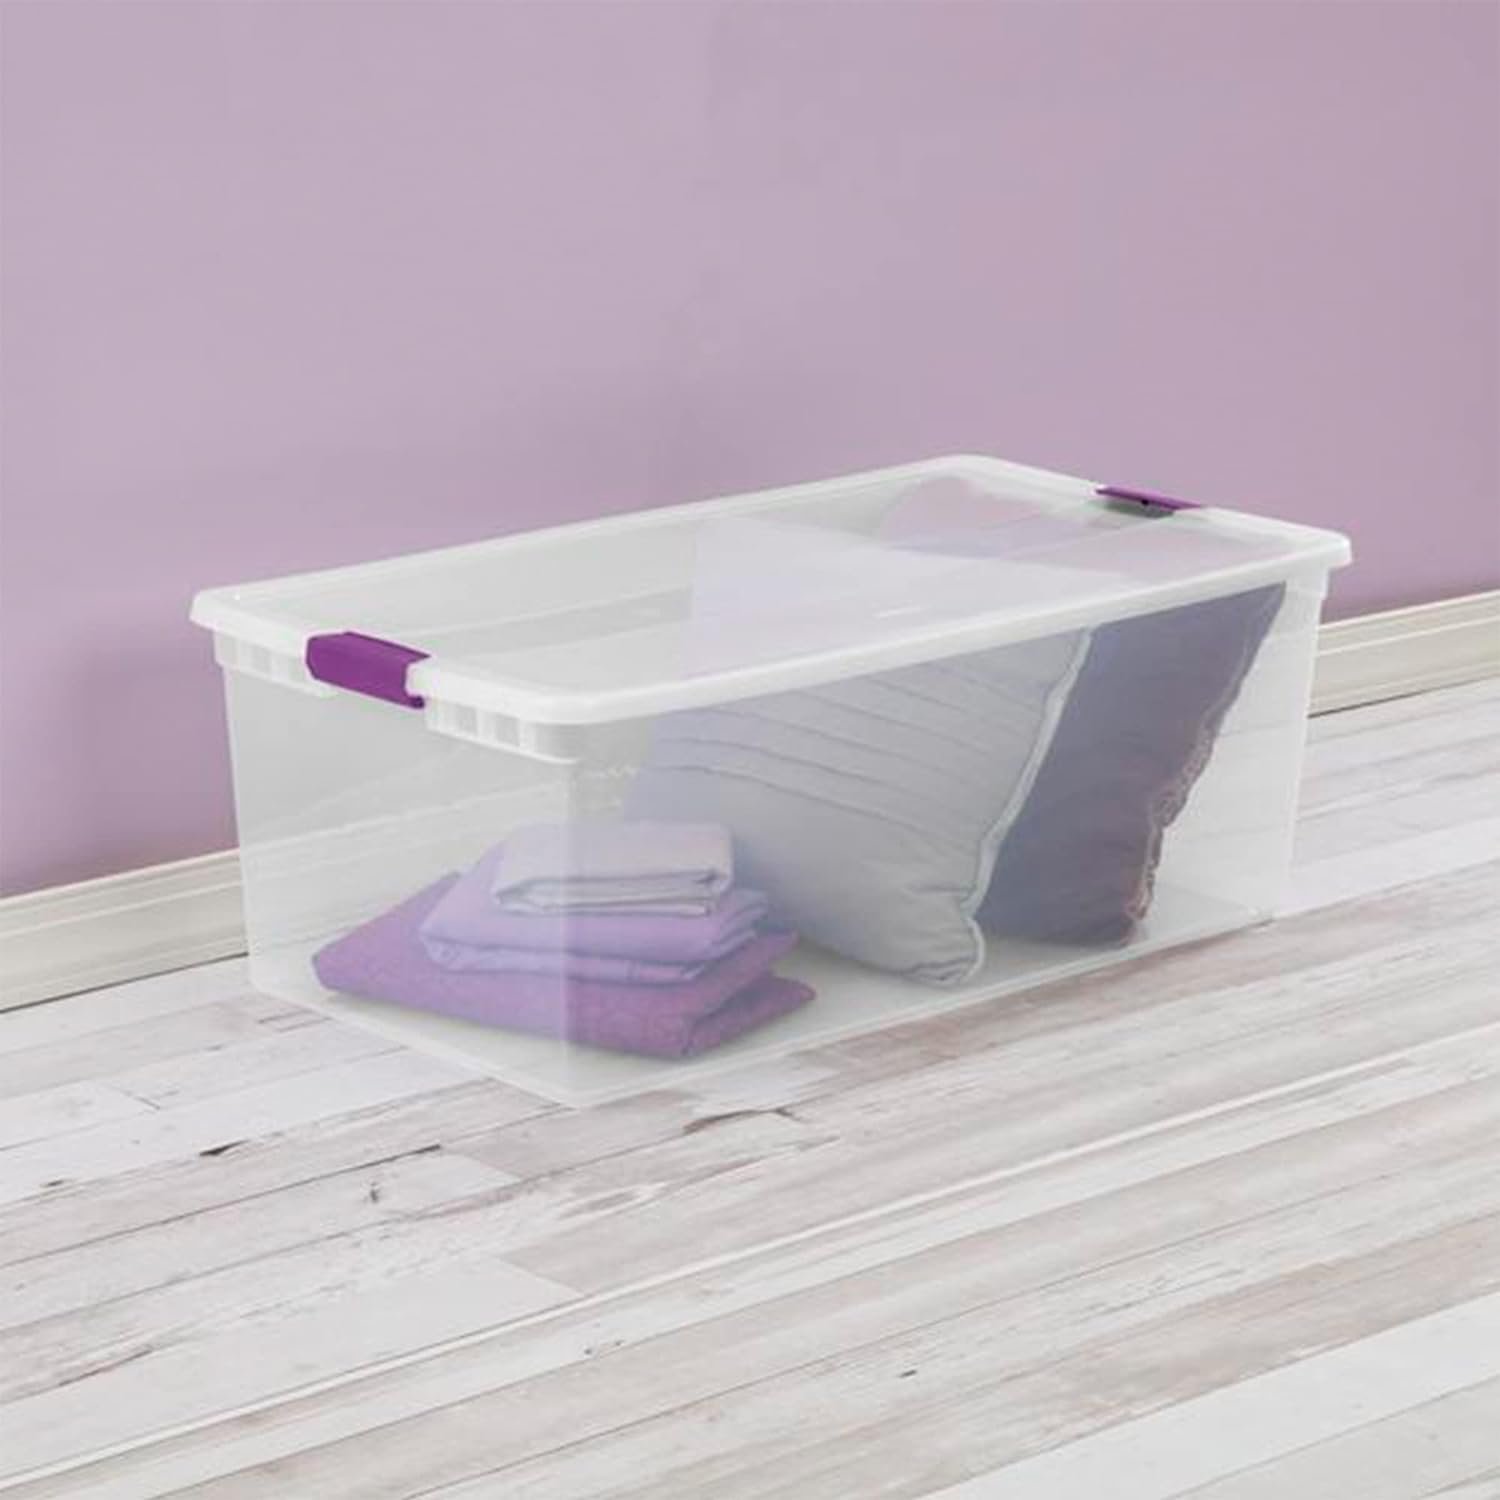 Sterilite 60 Qt ClearView Underbed Storage Box Review